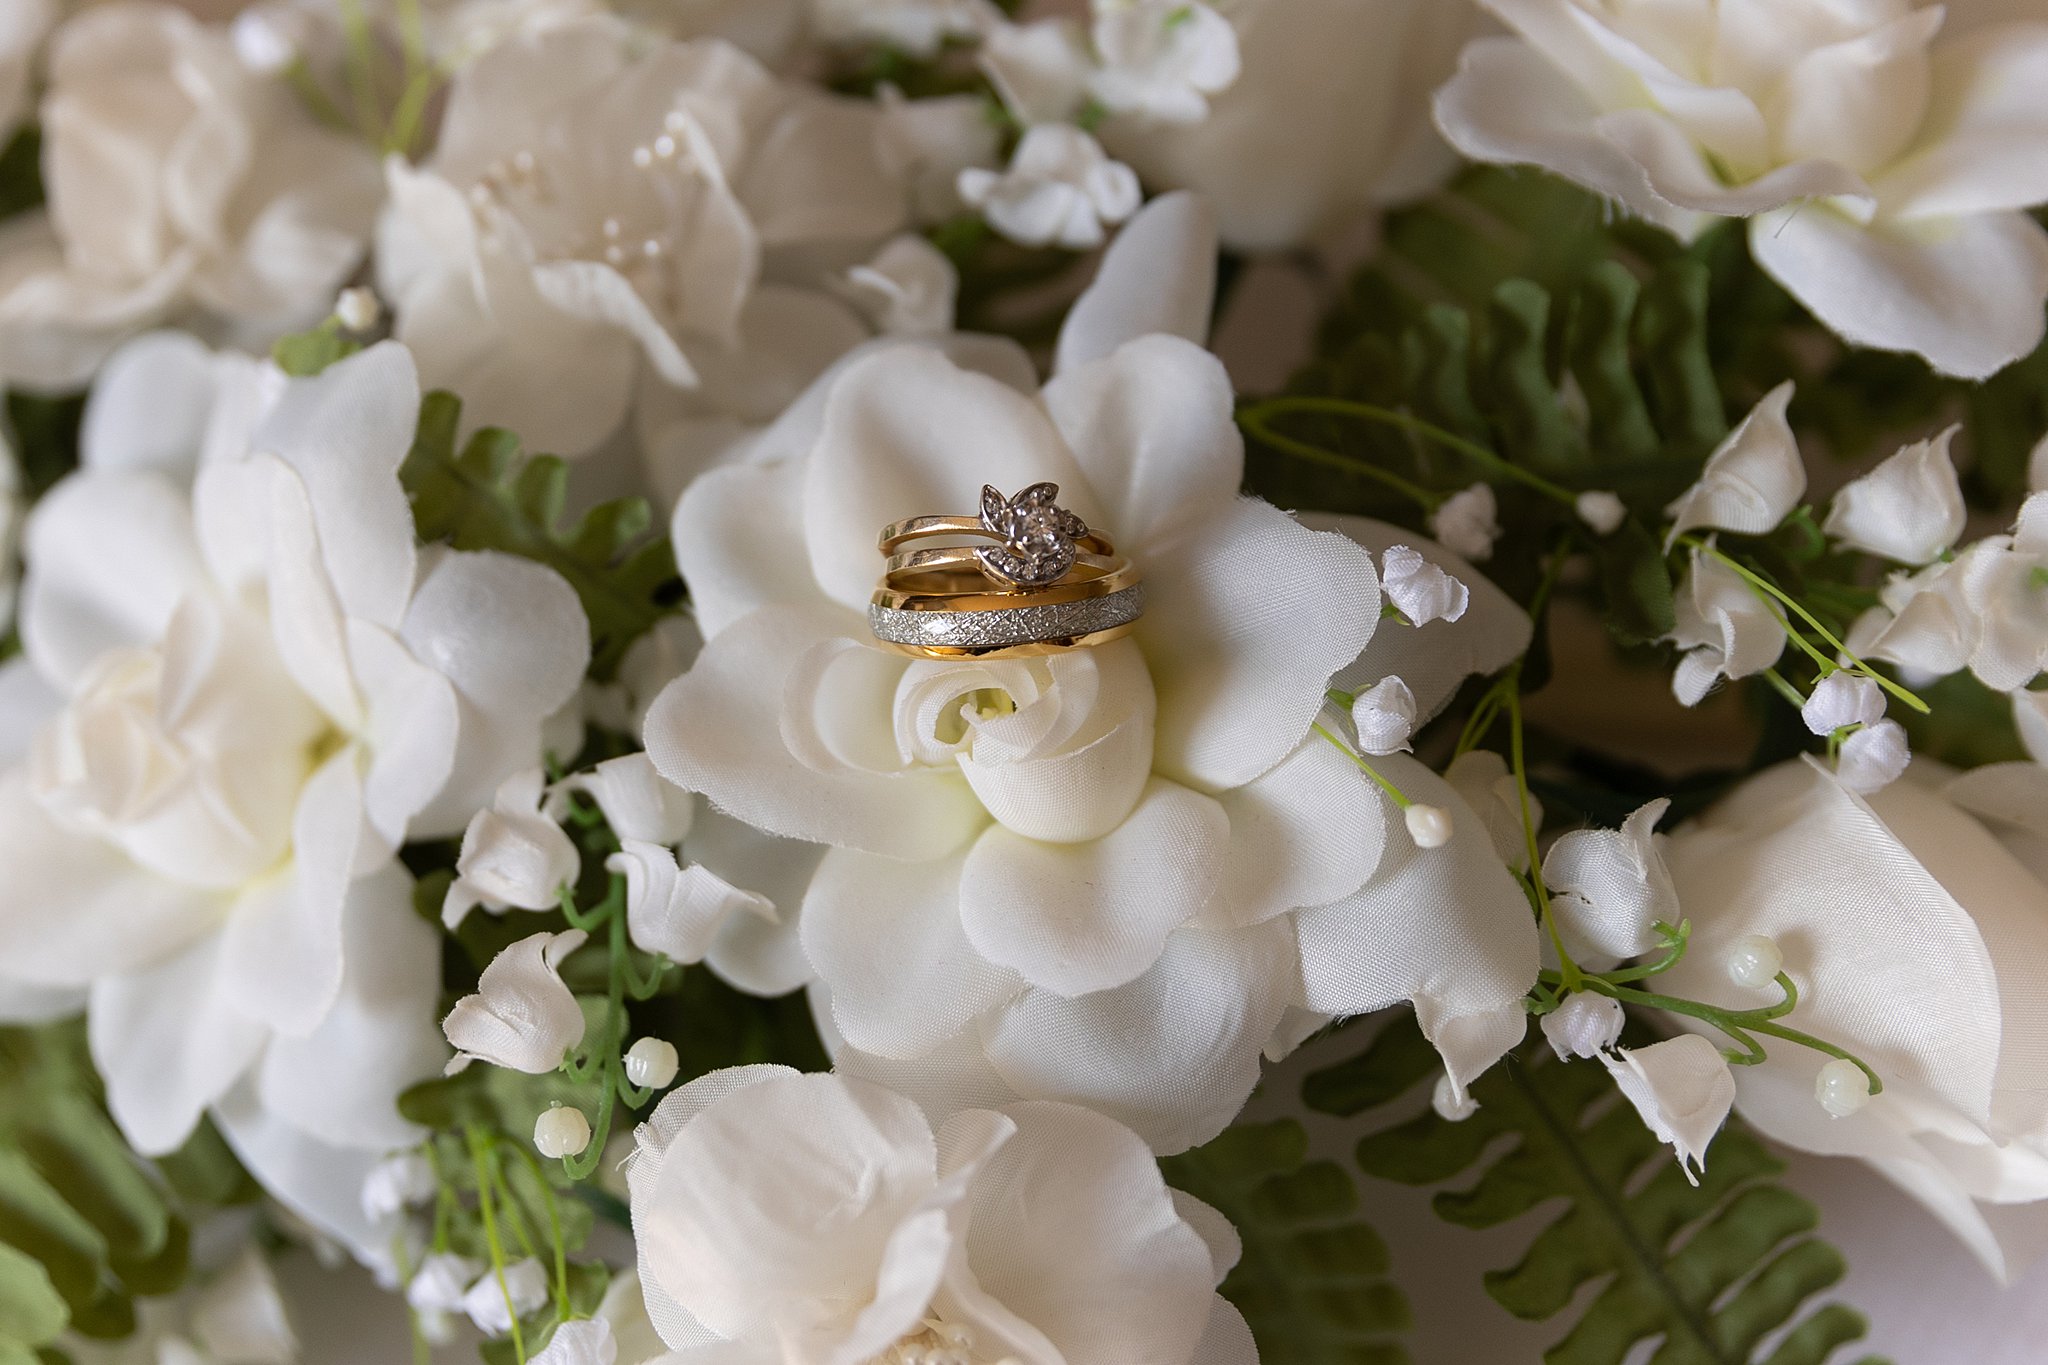 Details of wedding bands sitting on white flowers the omar wedding